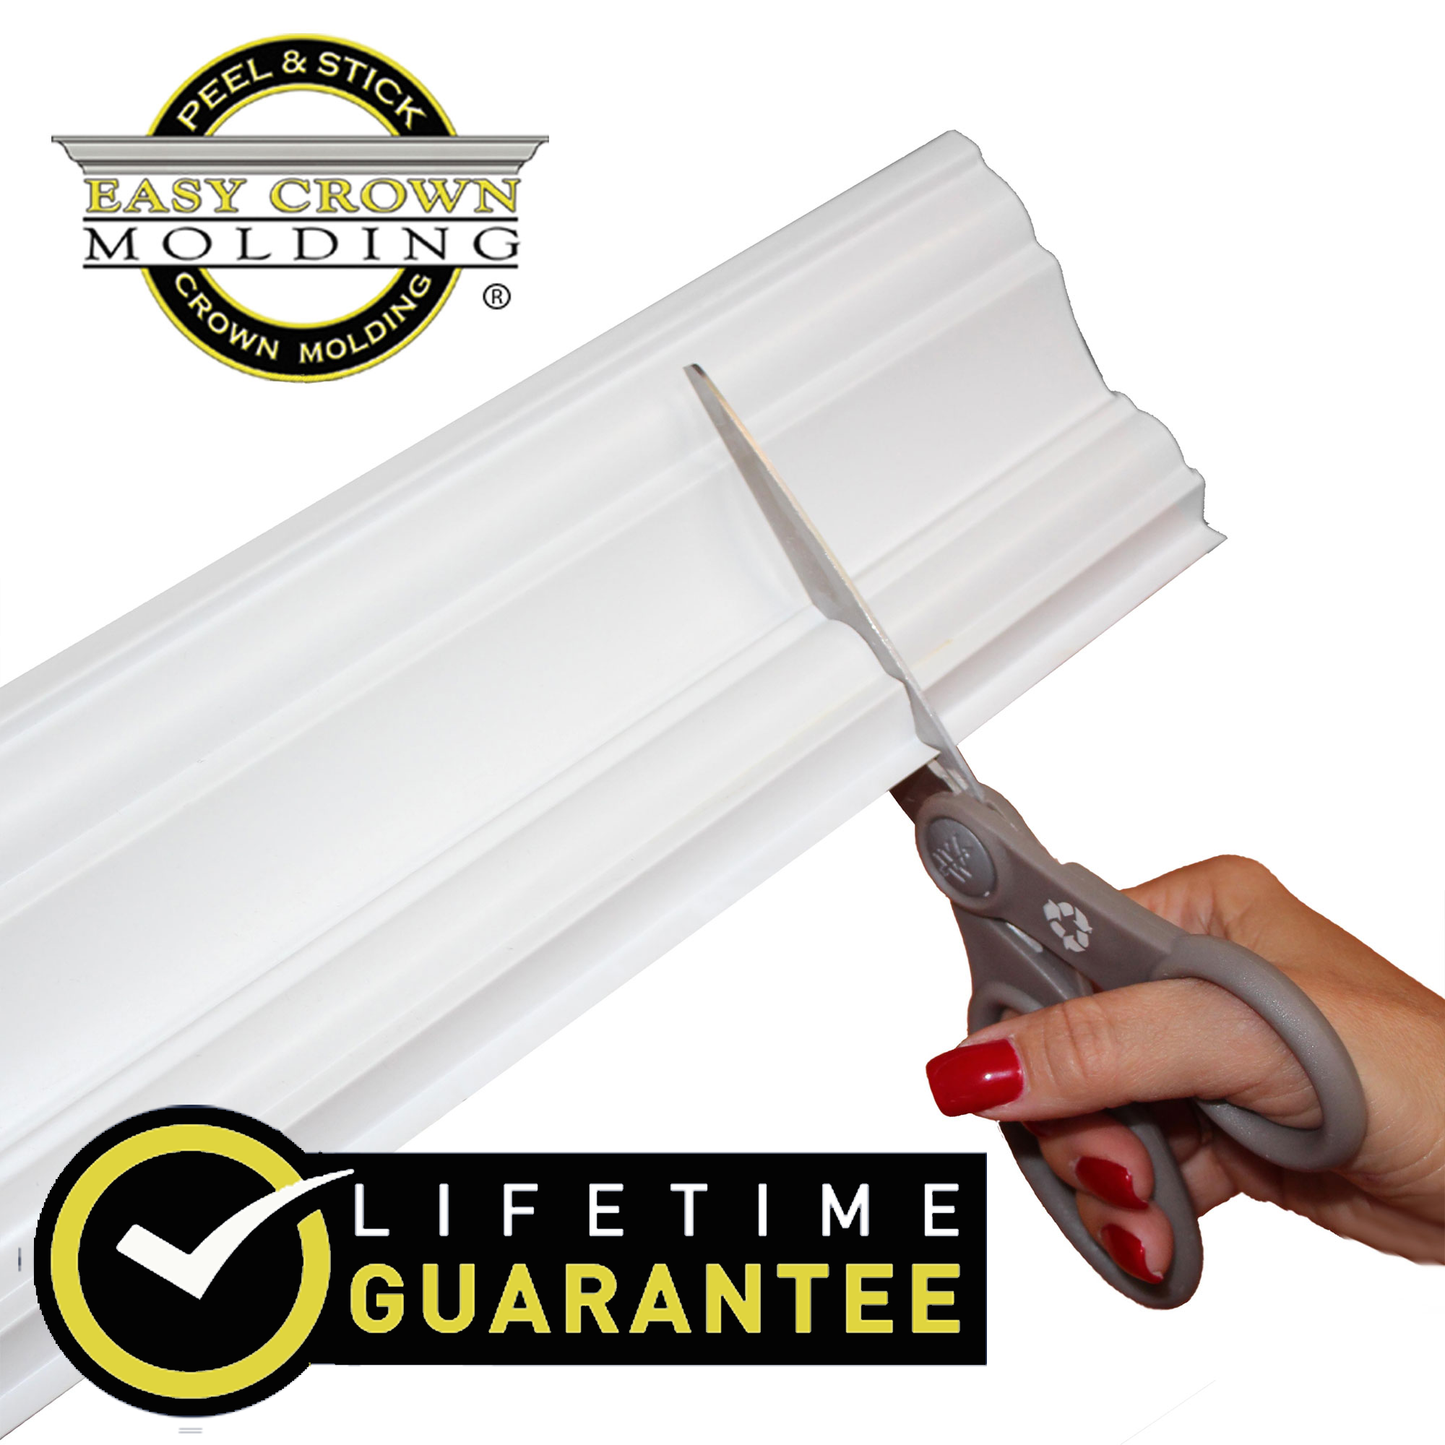 4" Easy Crown Molding 85' foot kit for textured ceilings